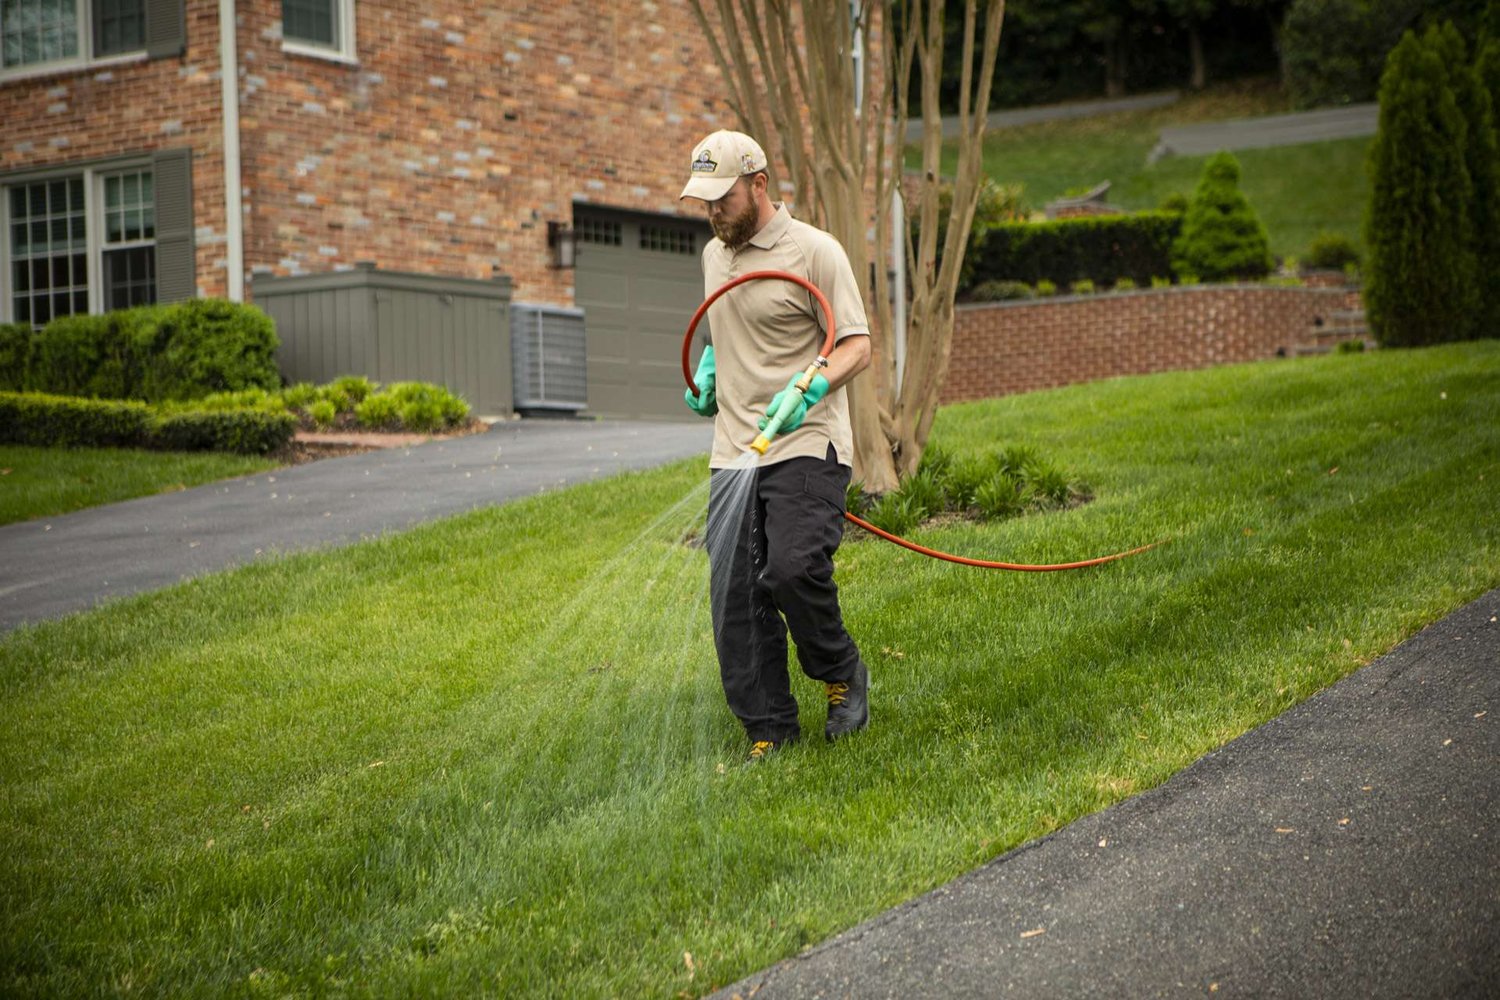 Lawn care technician spraying lawn to maintain healthy grass